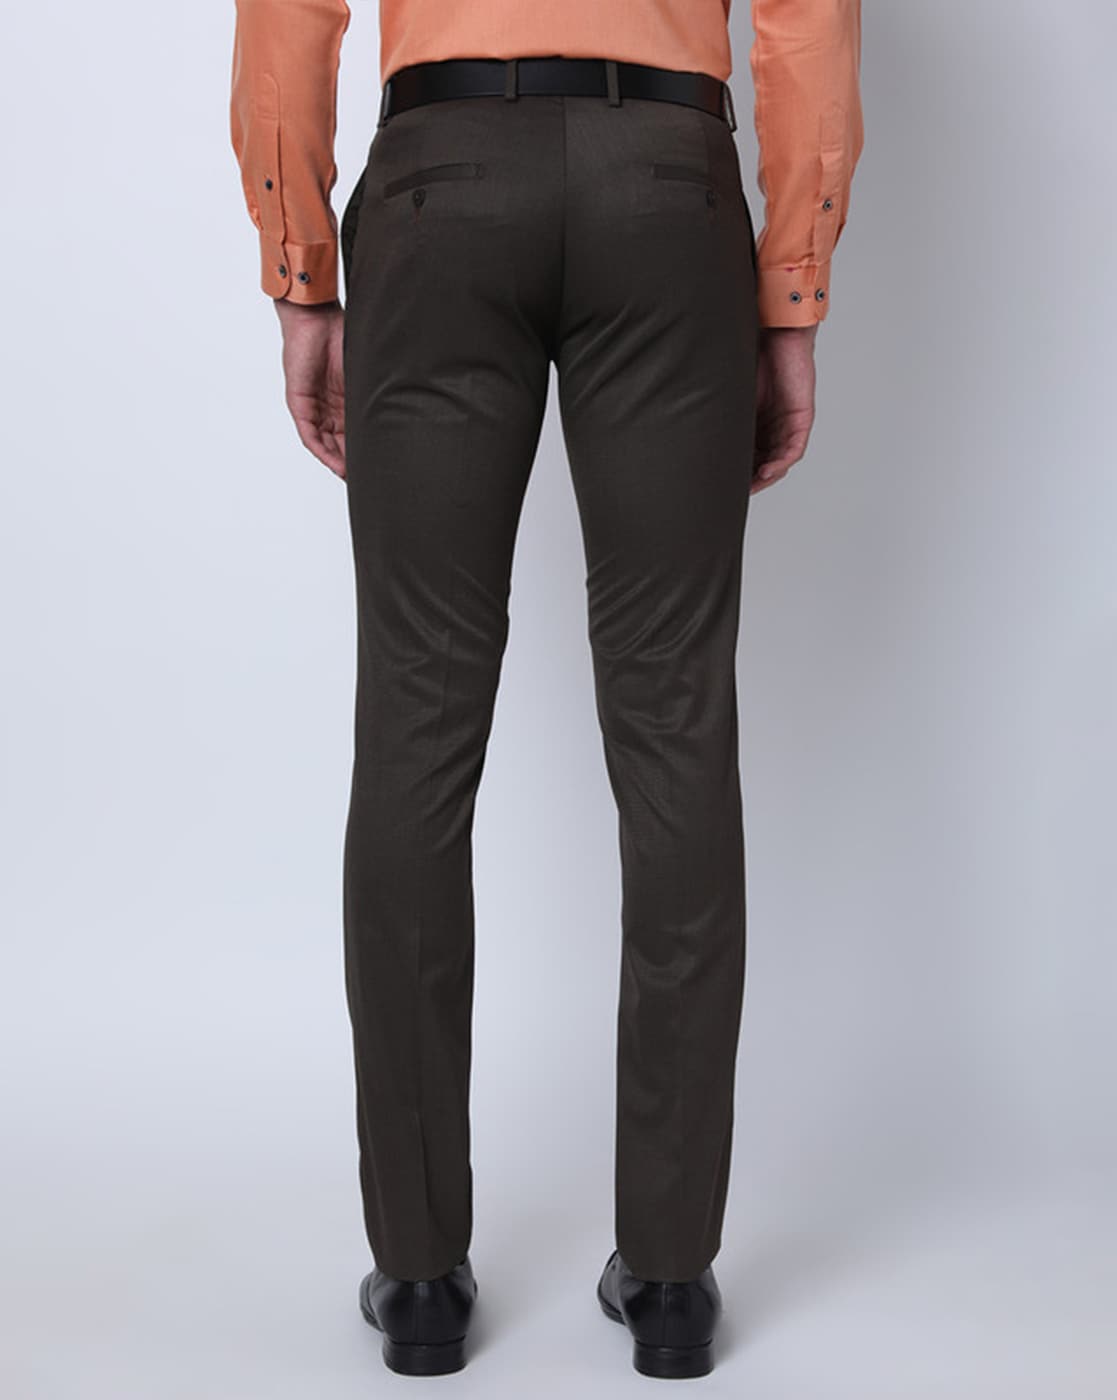 Buy Oxemberg Trousers & Lowers - Men | FASHIOLA INDIA